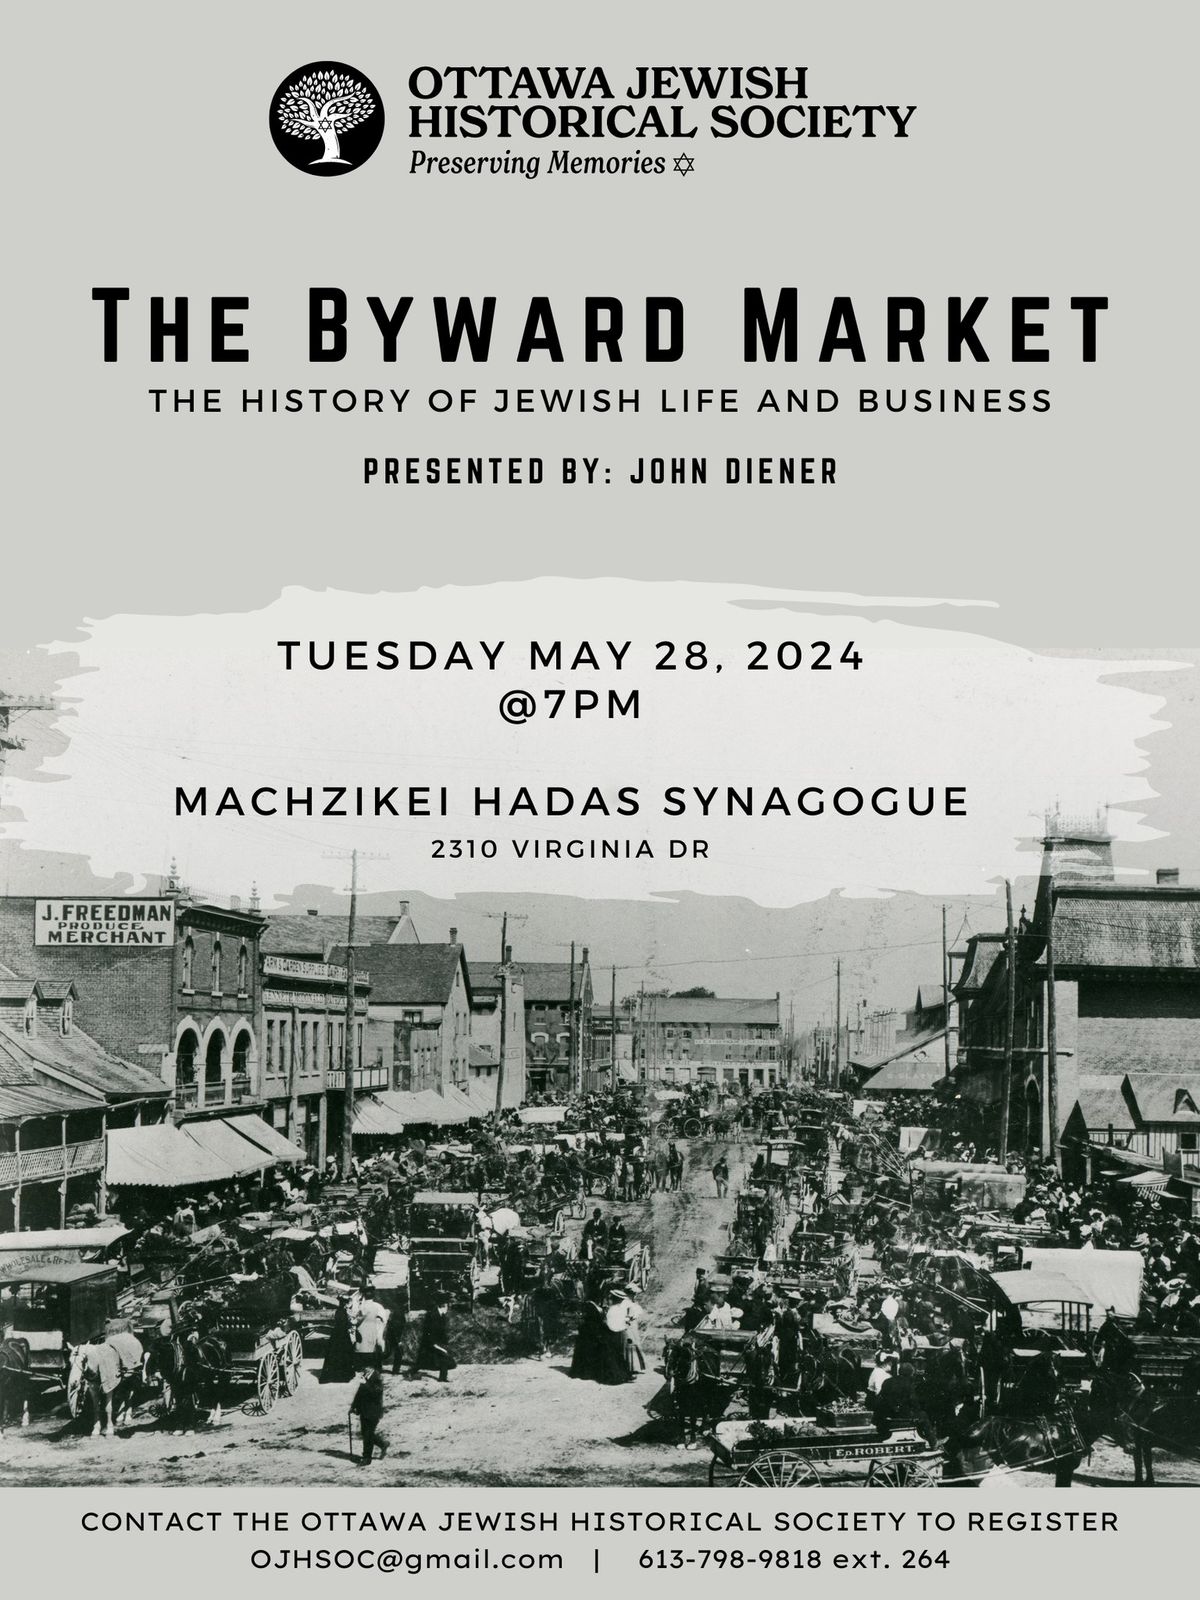 The Byward Market: The history of Jewish life and business